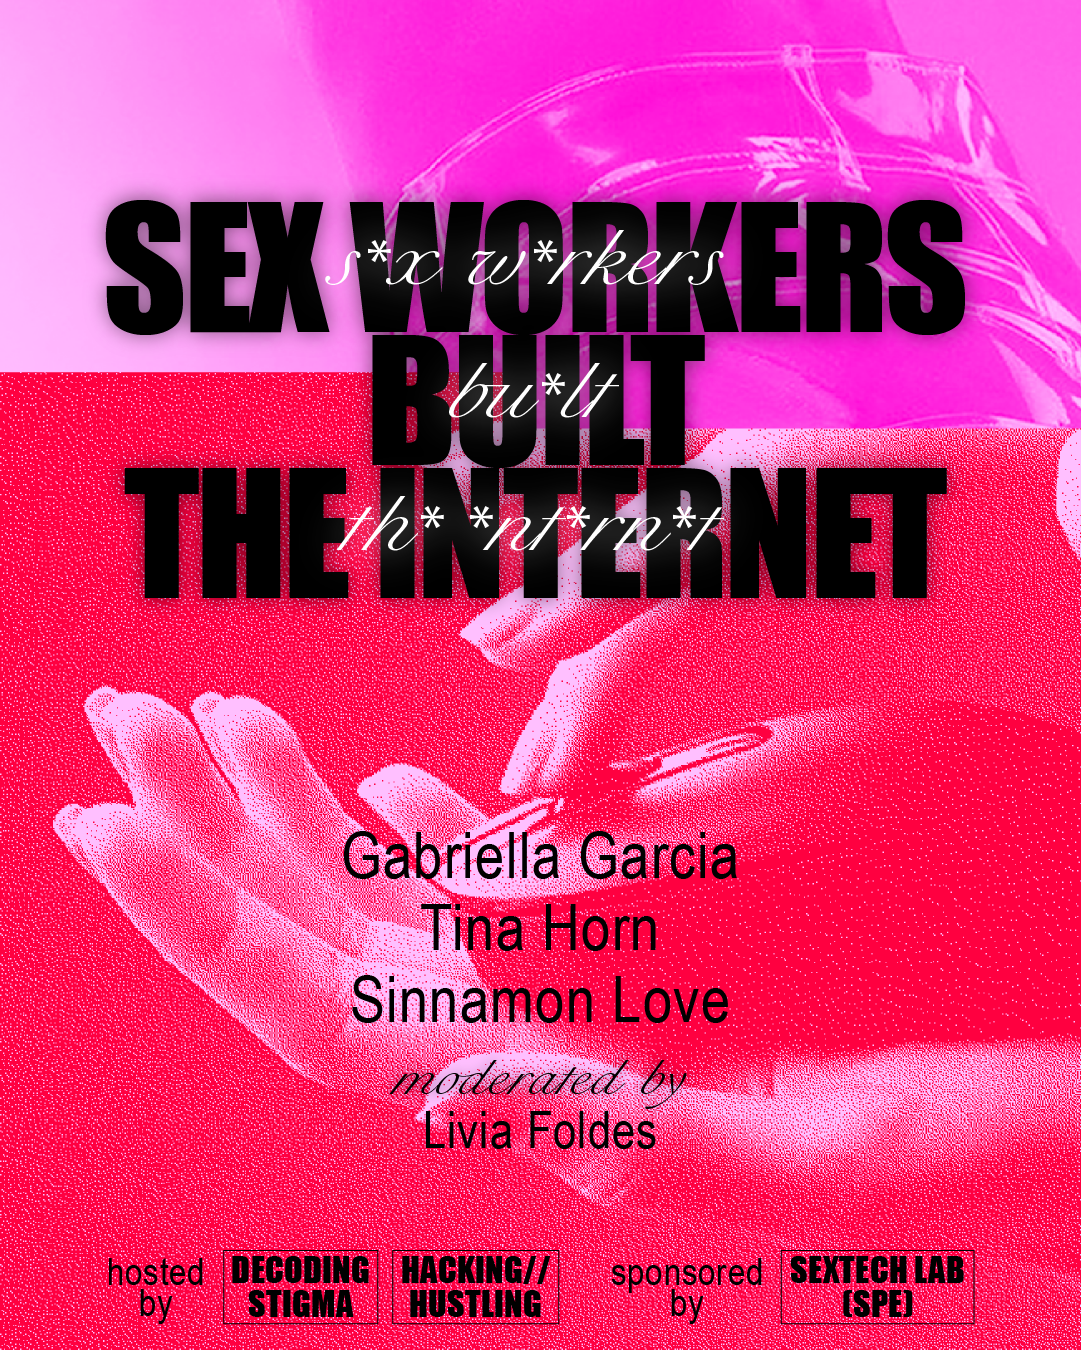 Over a red-tinted photo of a manicured hand cradling a computer mouse, a bold title reads “Sex Workers Built the Internet: Gabriella Garcia, Tina Horn, Sinnamon Love, moderated by Livia Foldes.”